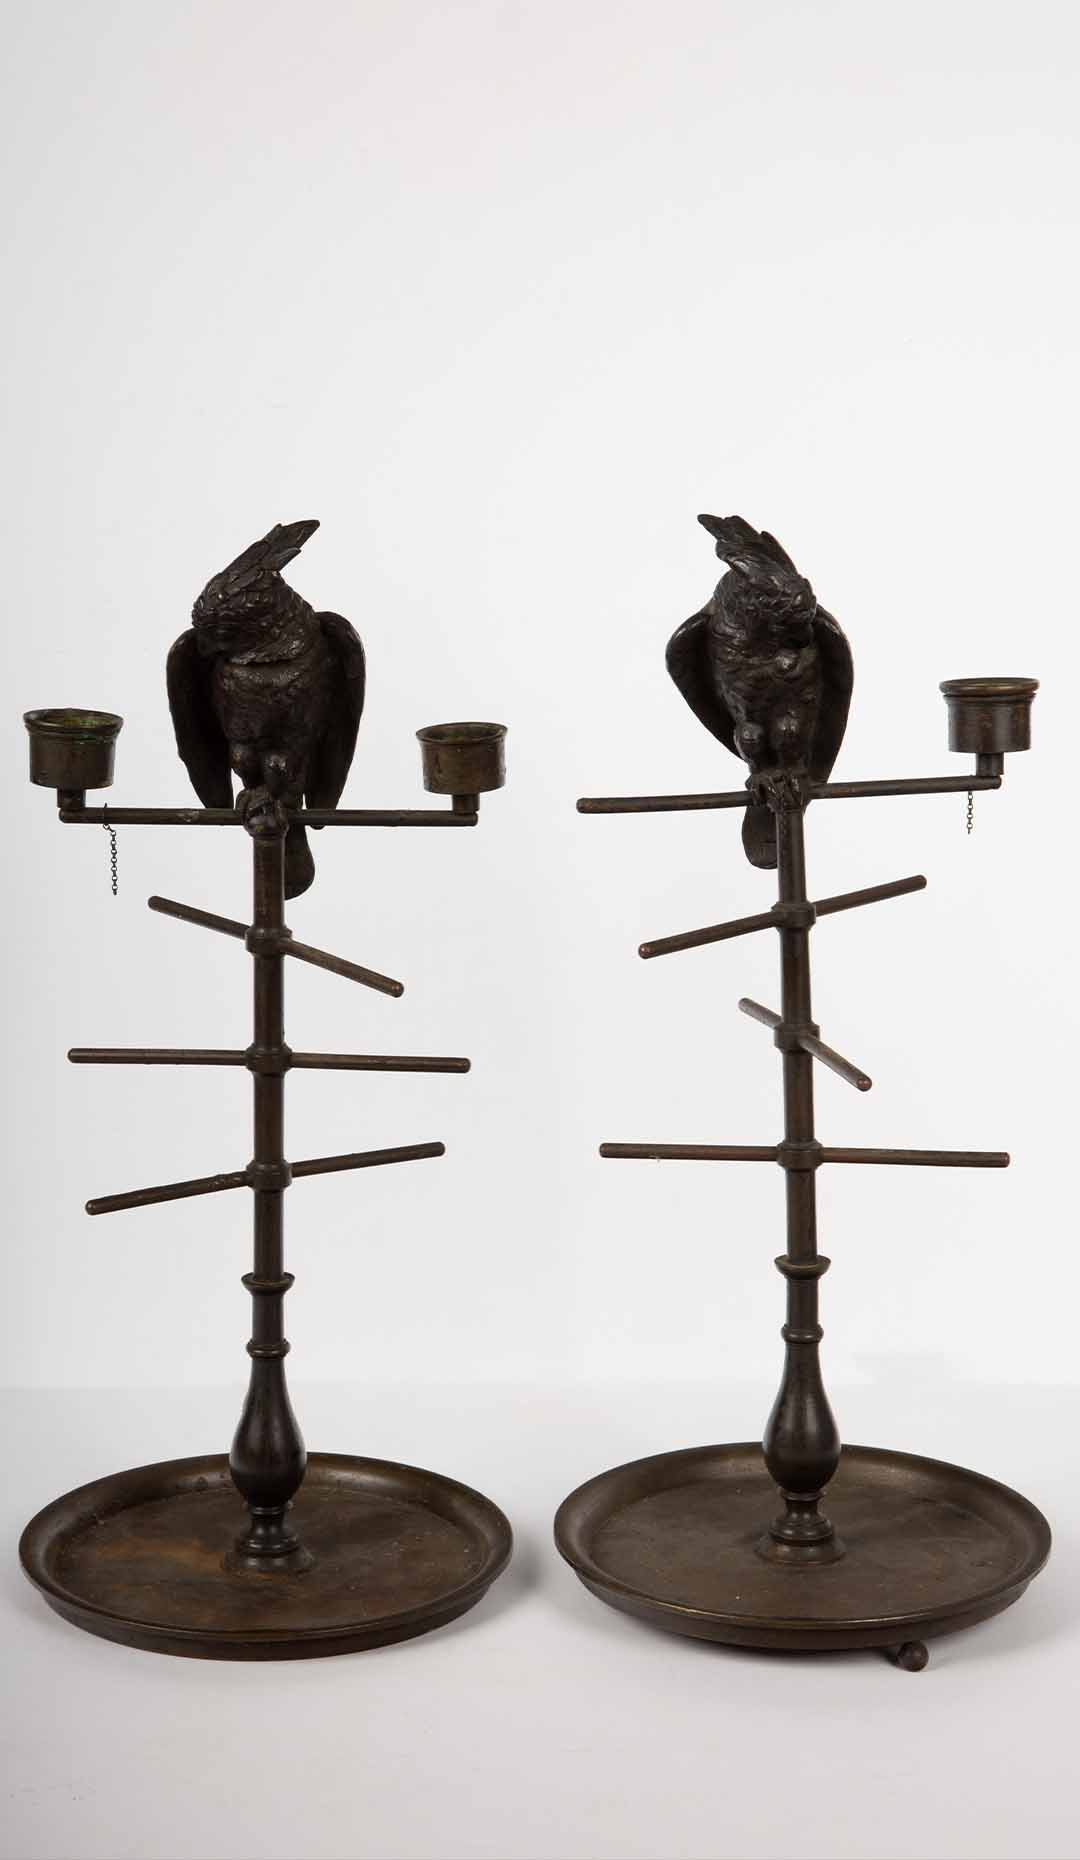 Whimsical 19th Century Parakeet Perch Inkwell Candlesticks: Ink ‘n’ Perch Delight!